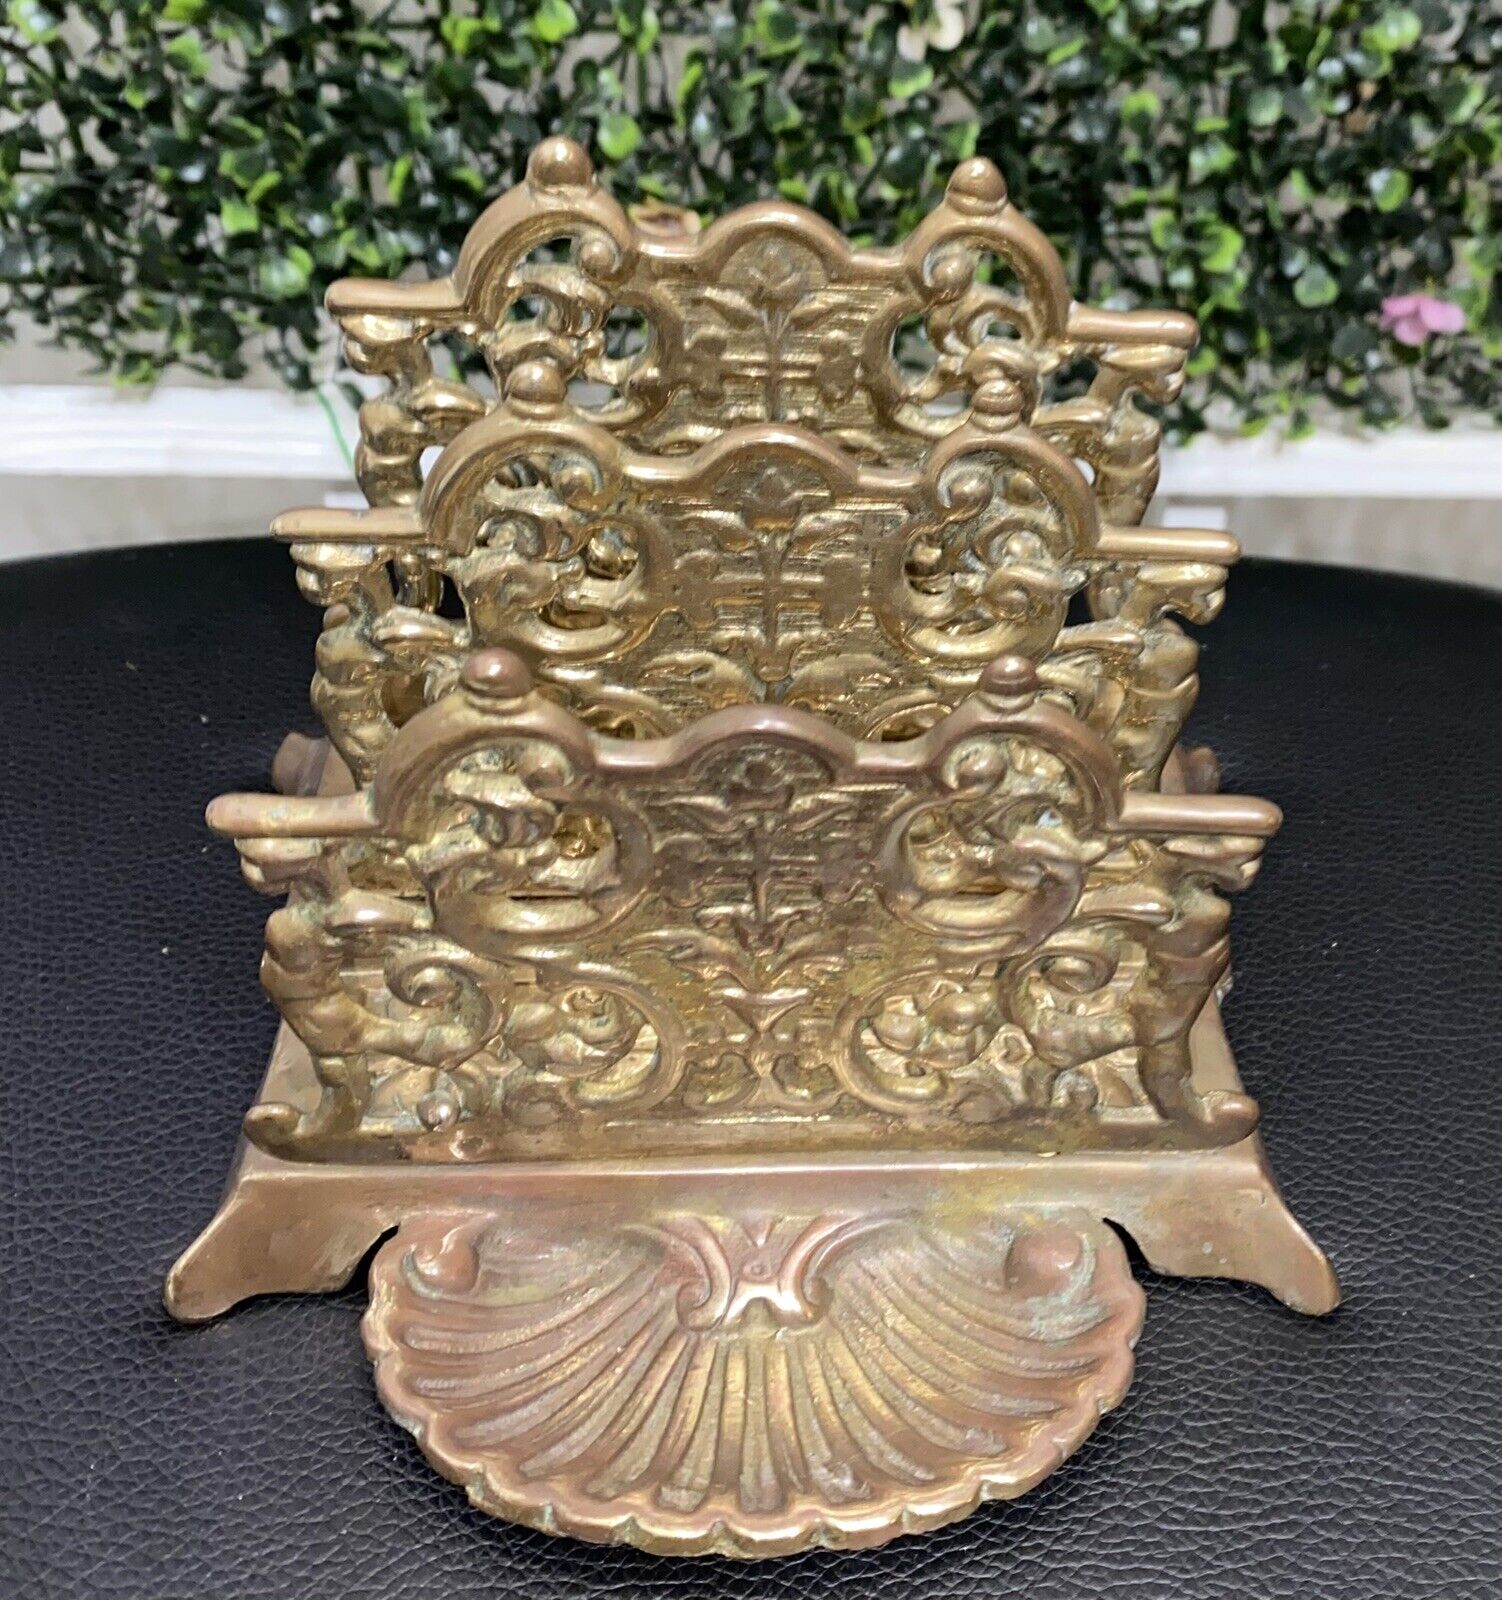 1920's Early English Brass Letter Rack Ornate with Claim Shaped Front